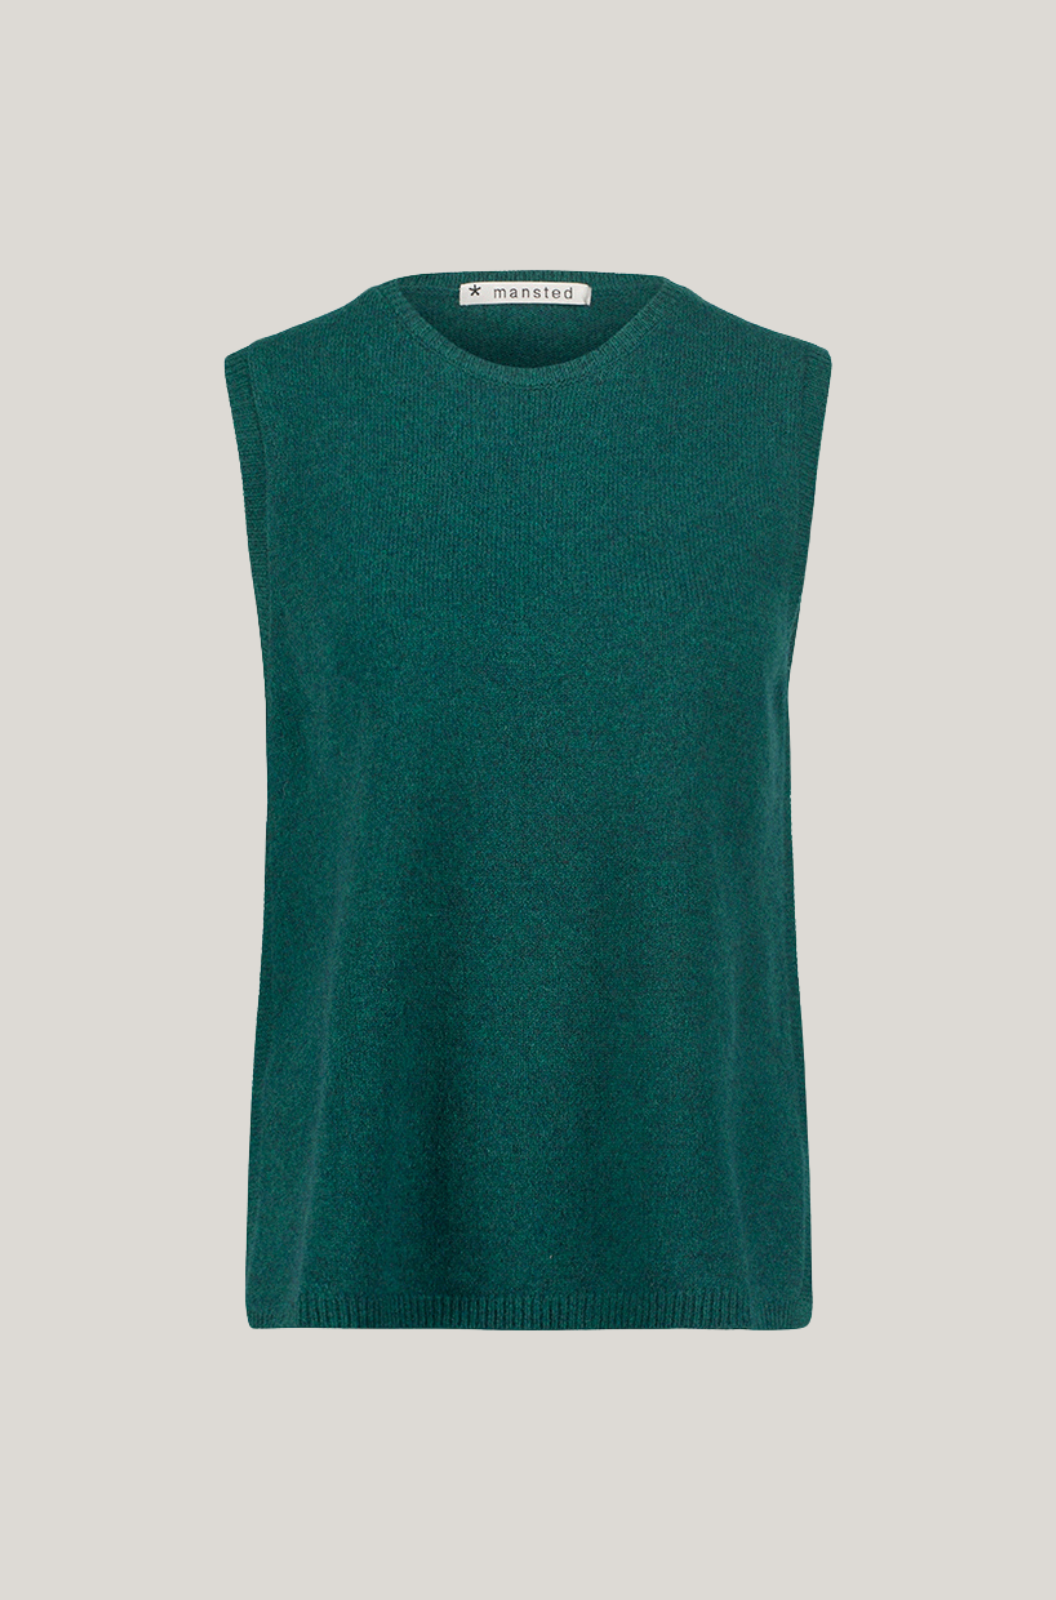 Mansted Denmark Mitos Lambswool Crew Vest in Cold Green